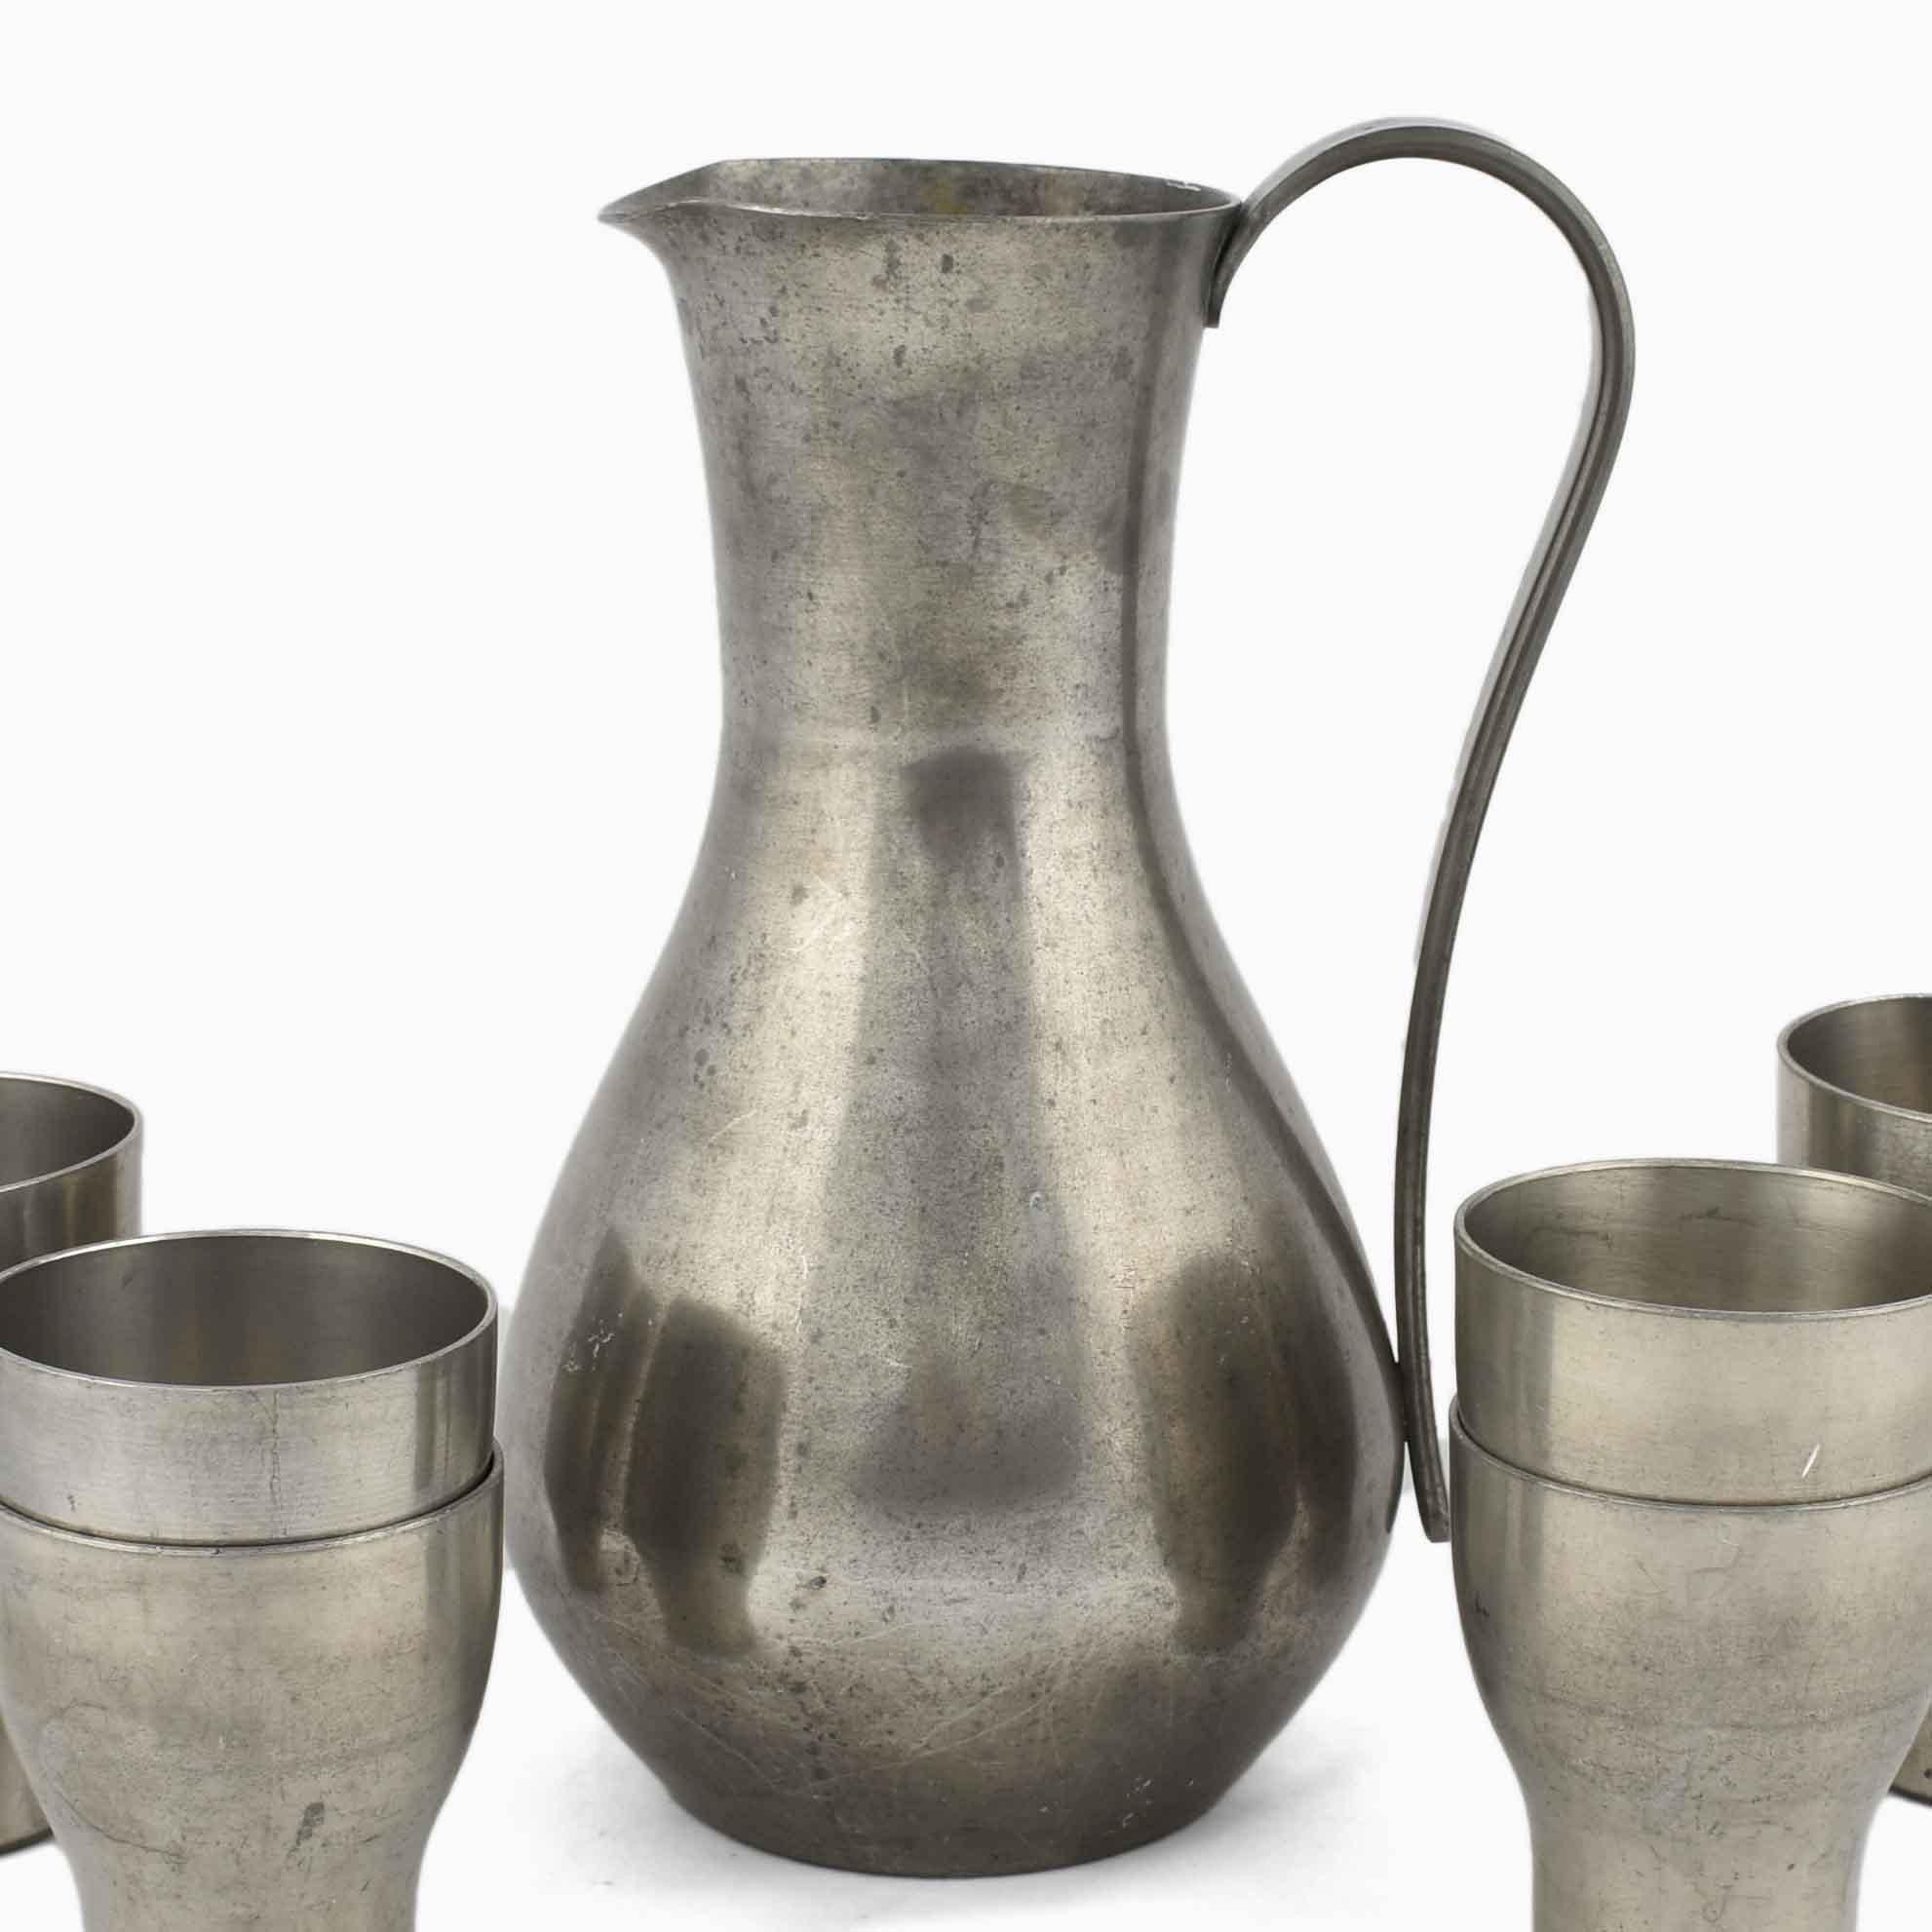 Pitcher with cups is an original decorative group of objects realized in the second third of the 20th century. 

Original Pewter.

Realized by Harald Buchrucker. Produced by Röders Factory. Made in Germany.

The set includes a pitcher and four